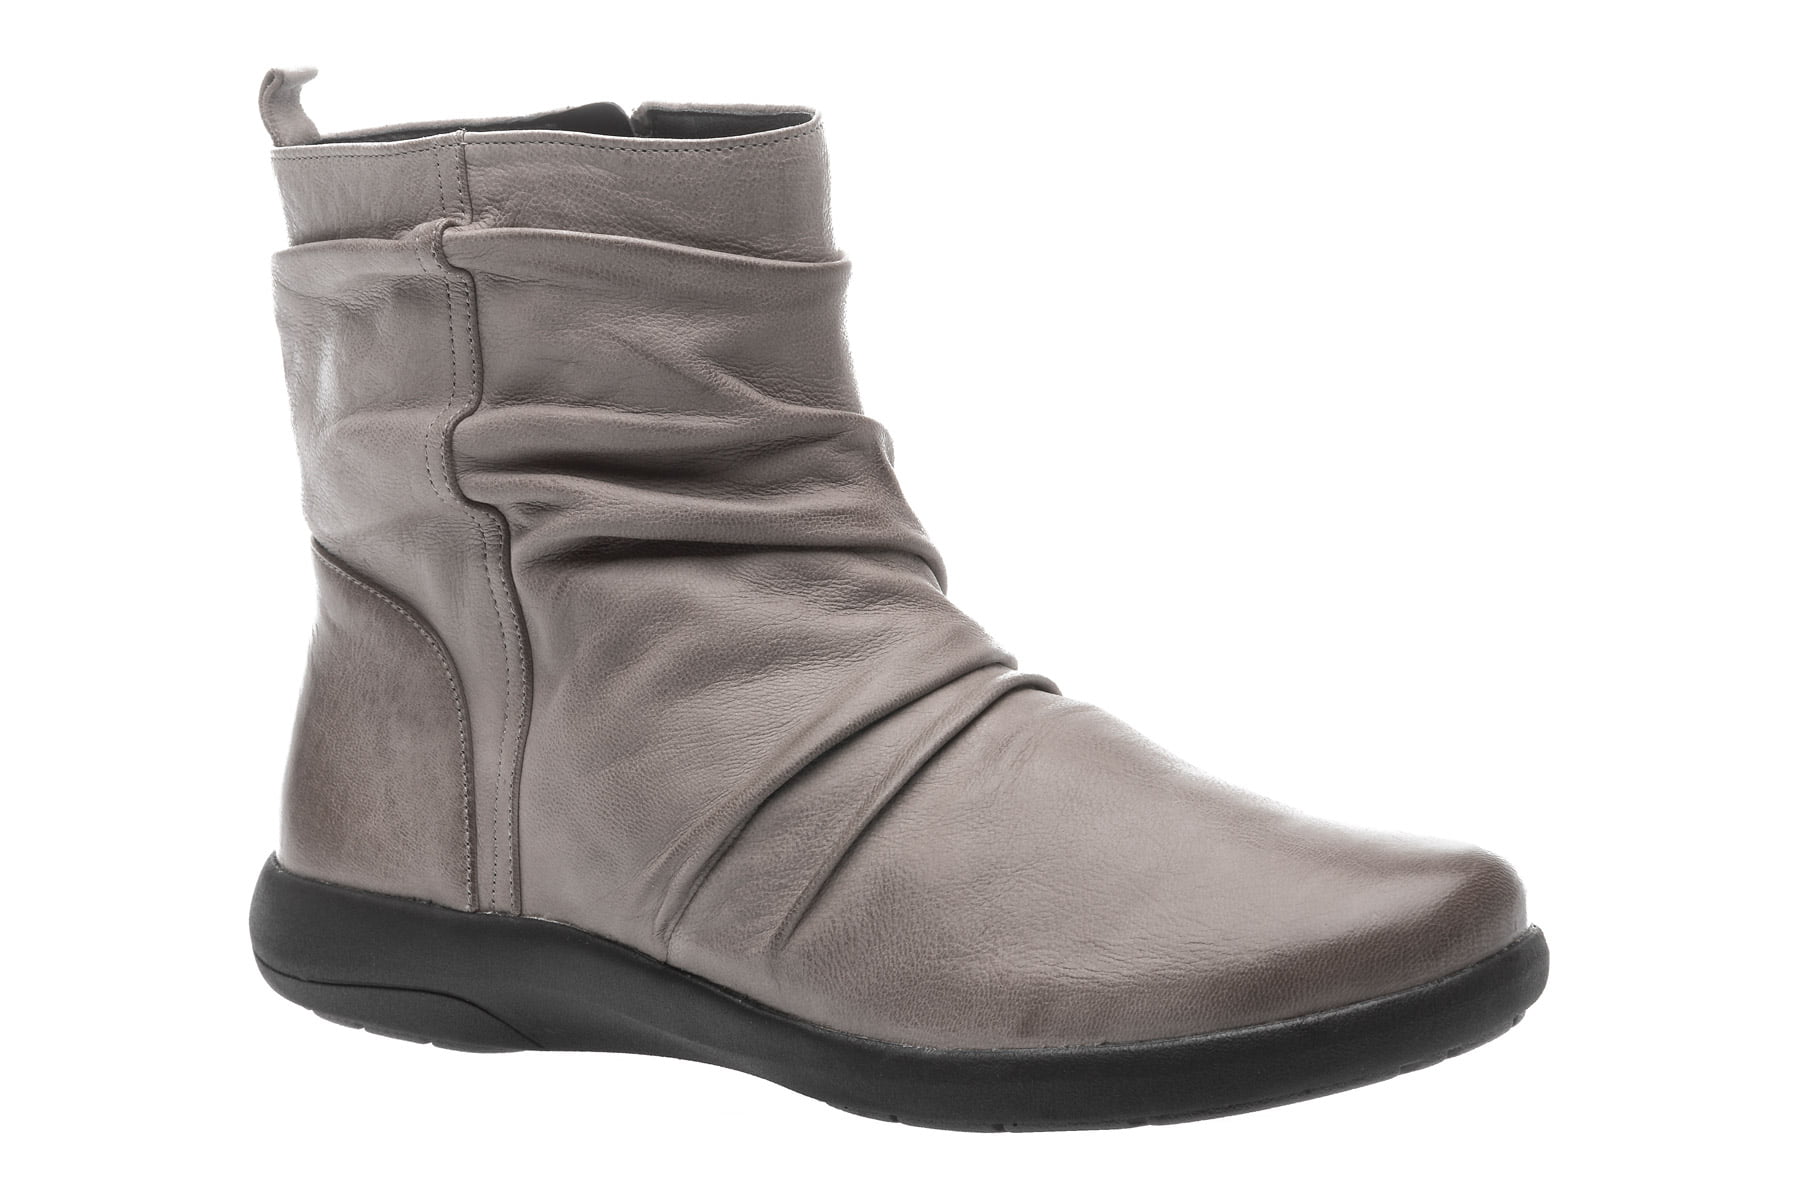 ABEO Women's Exeter - Ankle Boots in Grey - Walmart.com